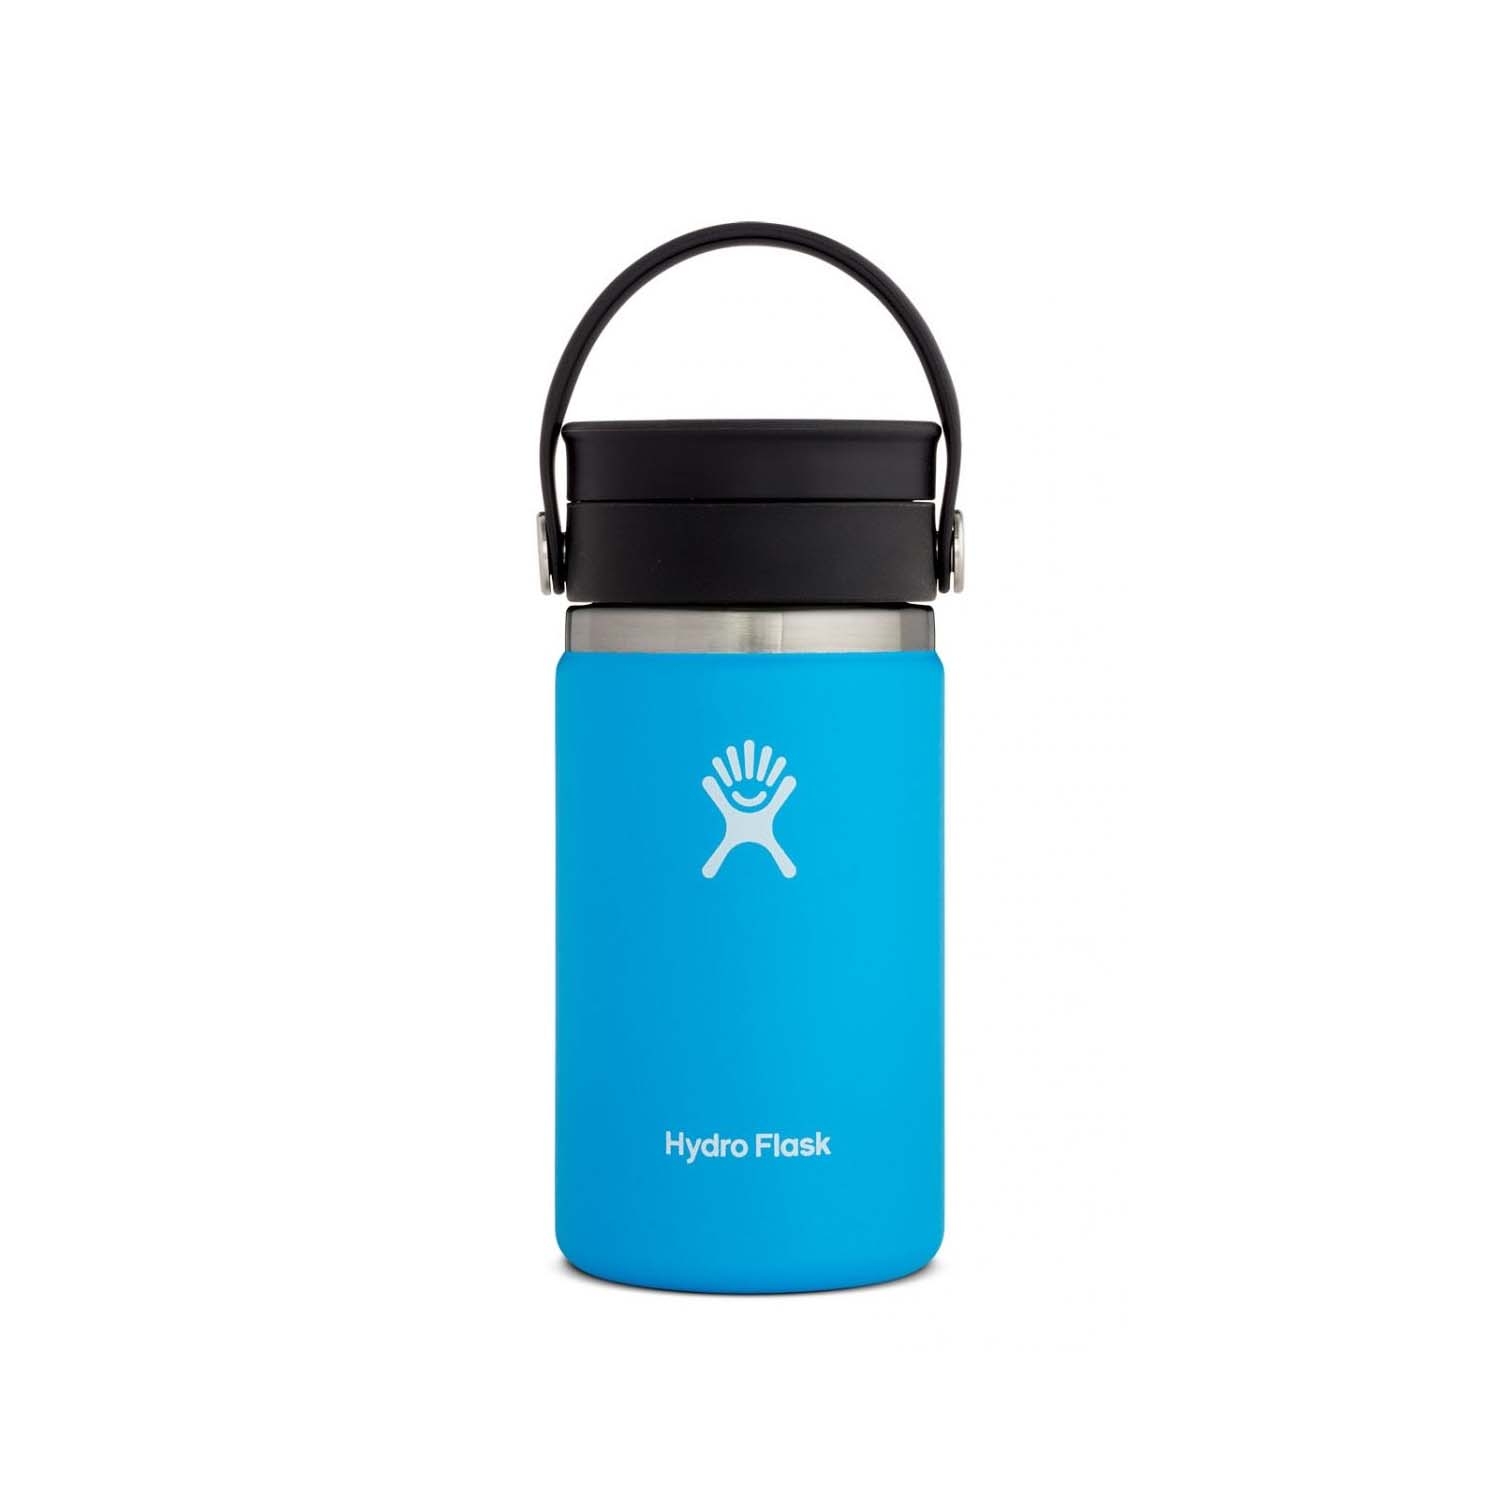 Hydro Flask 12oz Wide Mouth Coffee Flask with Flex Sip Lid Pacific